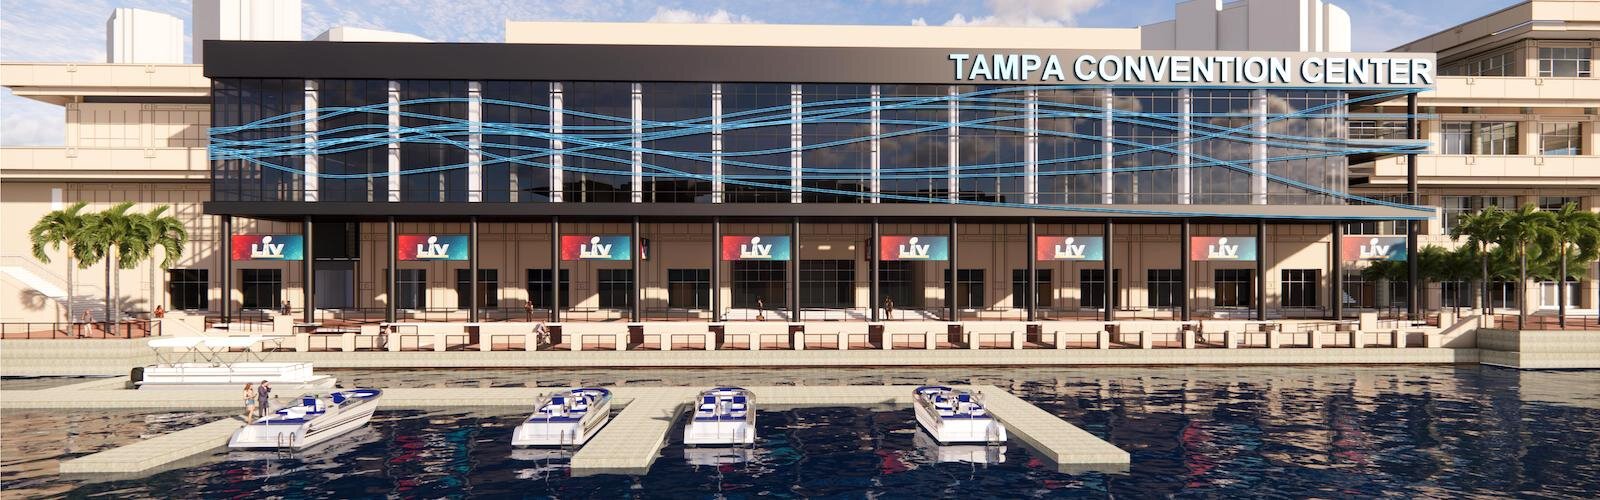 The majority of renovation work now underway at the Tampa Convention Center will take place on the outside of the building, which sits on the Hillsborough River in downtown Tampa.